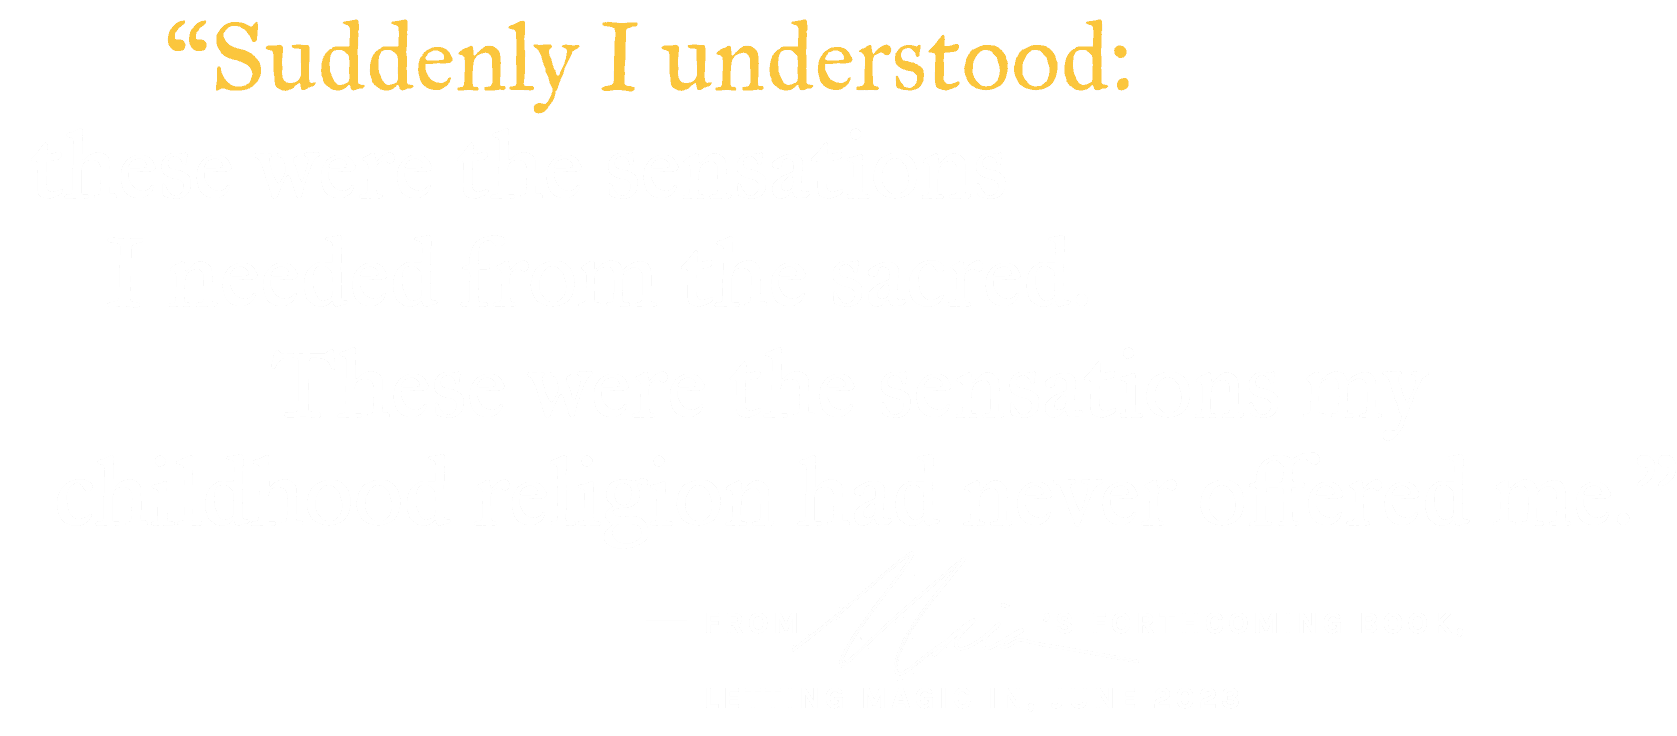 Suddenly I understood: these were the sensations I needed from the sacred. These were the sensations my childhood religion had never offered me. - from Maia's forthcoming book, Letting Magic In, June 2023